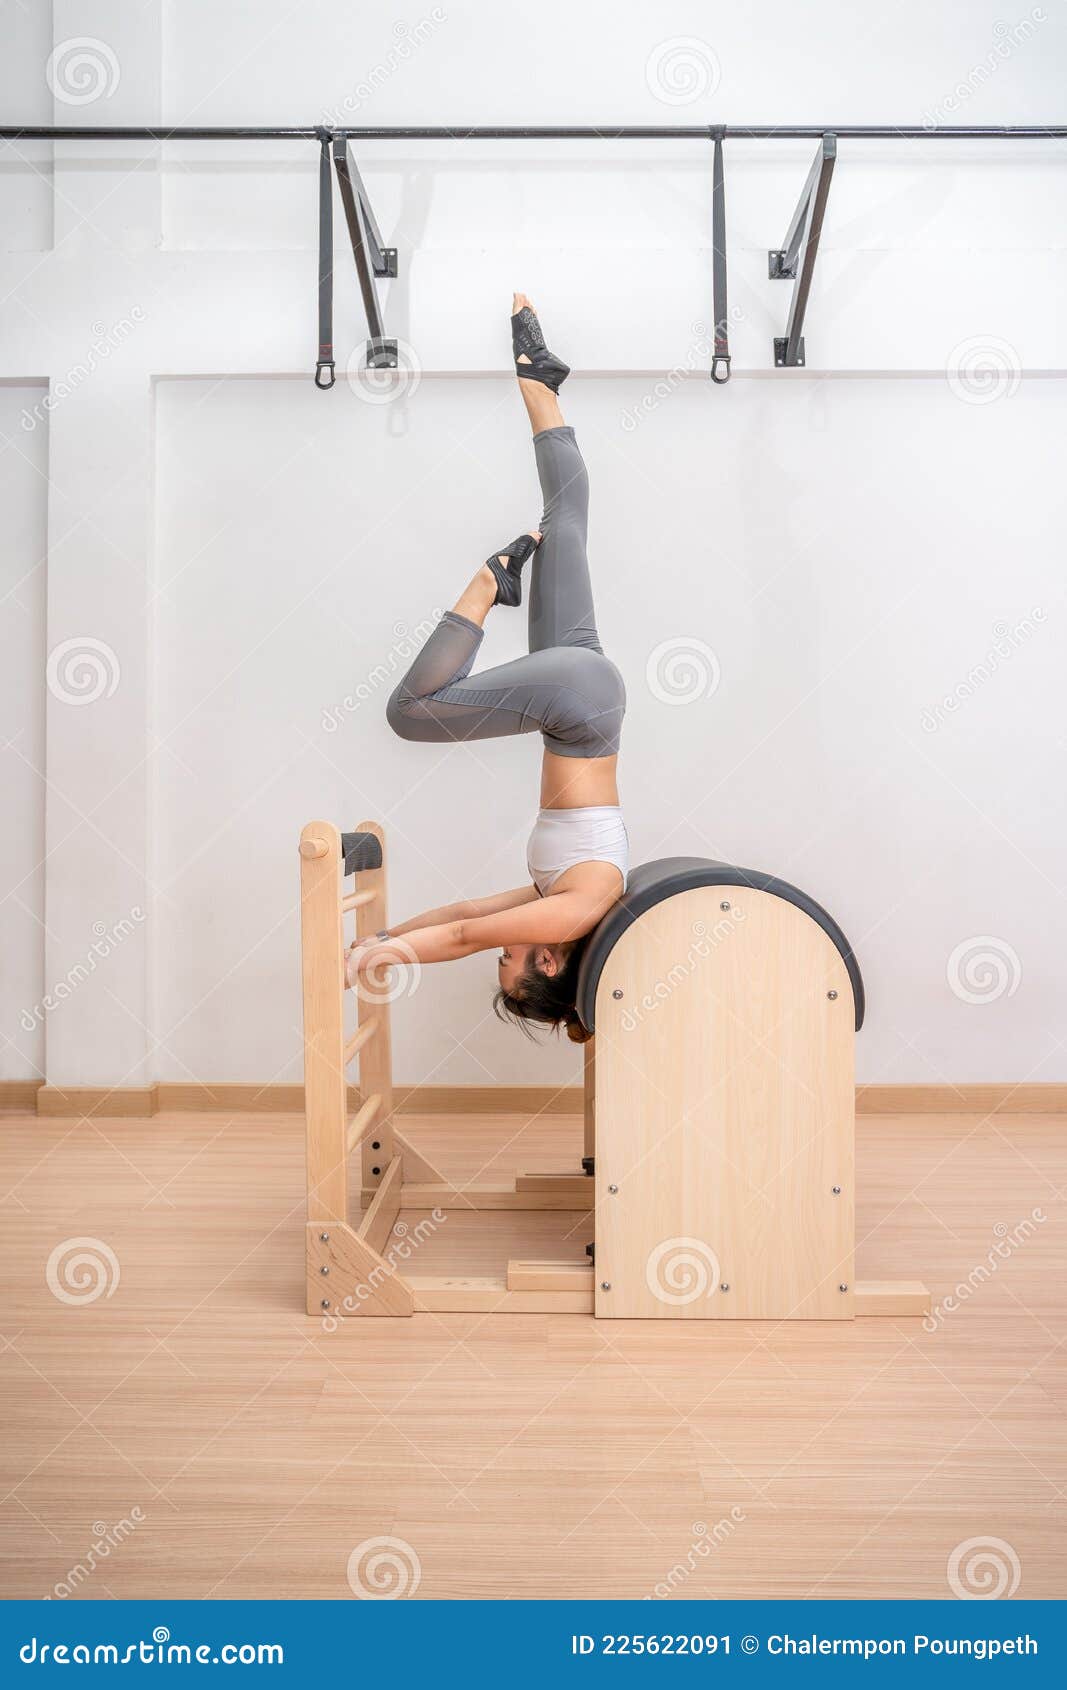 https://thumbs.dreamstime.com/z/young-asian-woman-working-pilates-ladder-barrel-machine-her-exercise-training-young-asian-woman-working-pilates-225622091.jpg